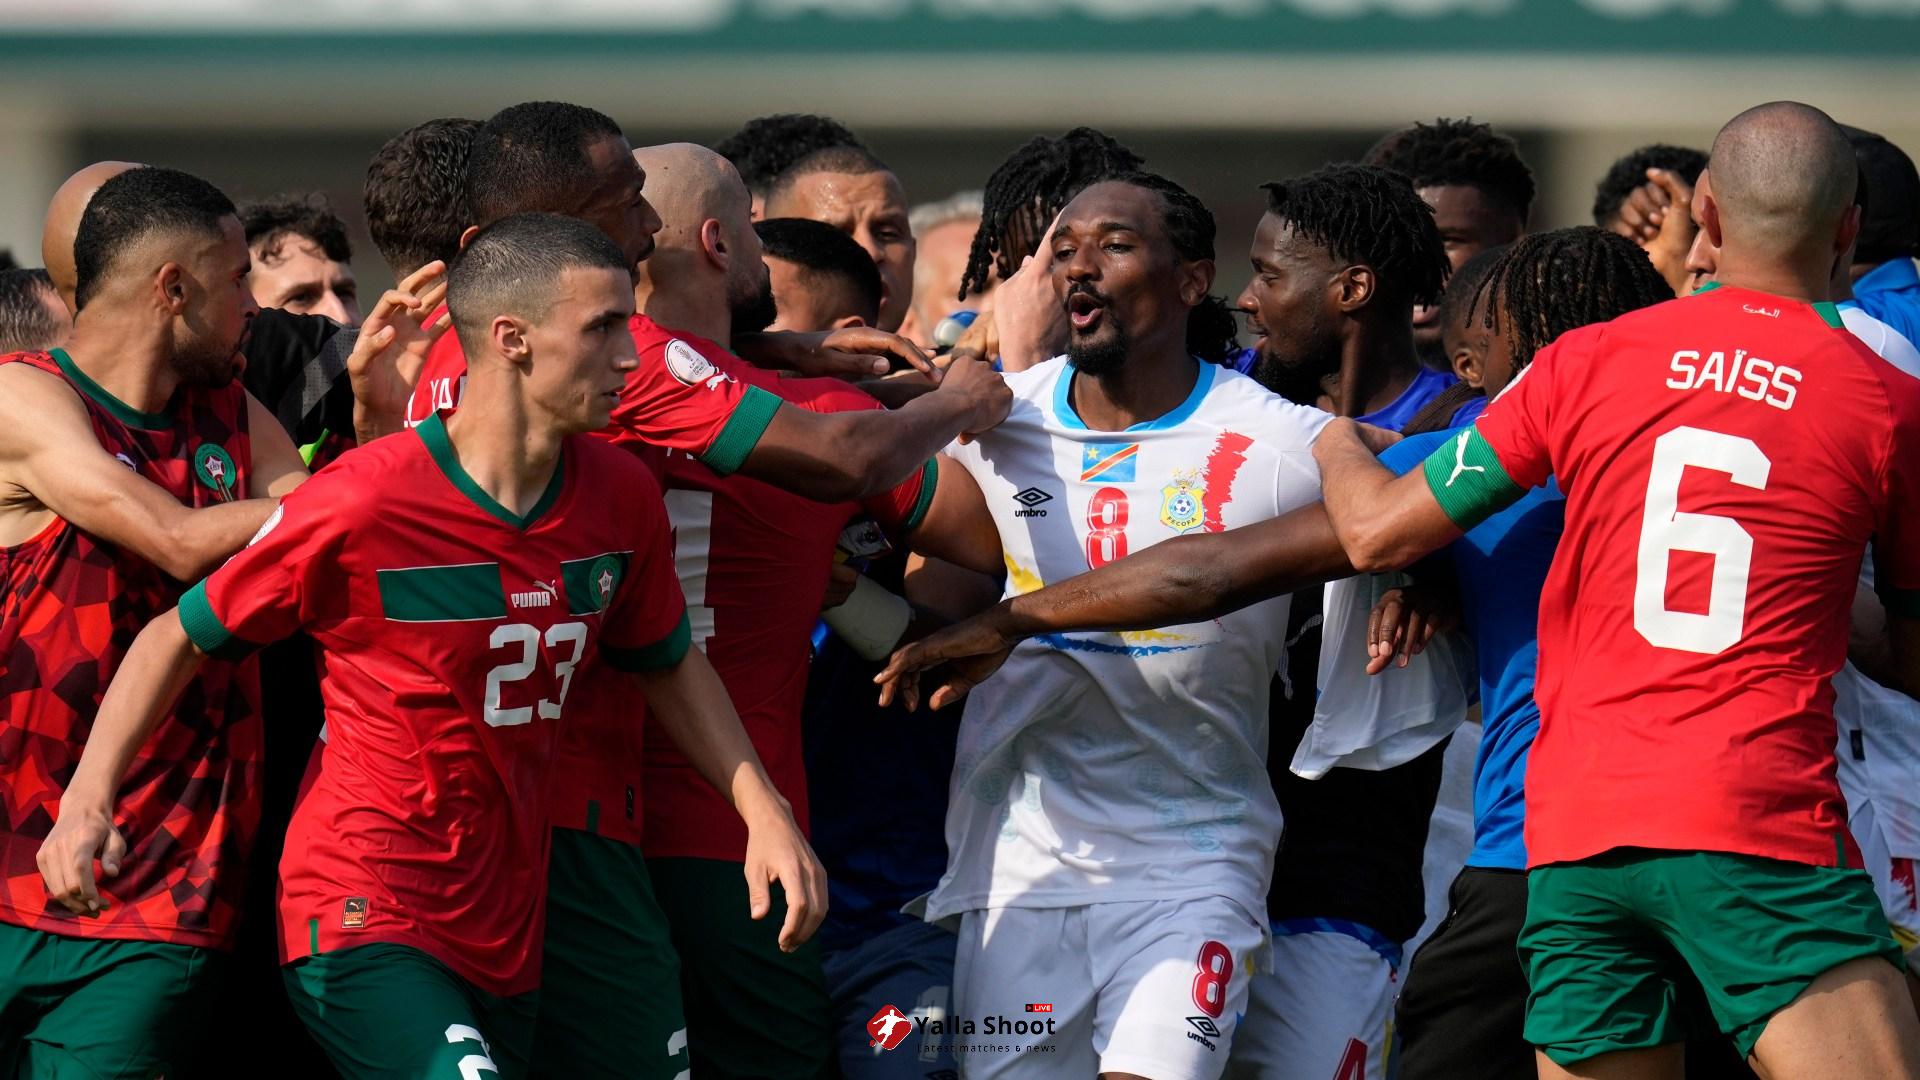 Africa Cup of Nations chaos as Morocco star chases opponent and brawl breaks out in tunnel before ace racially abused